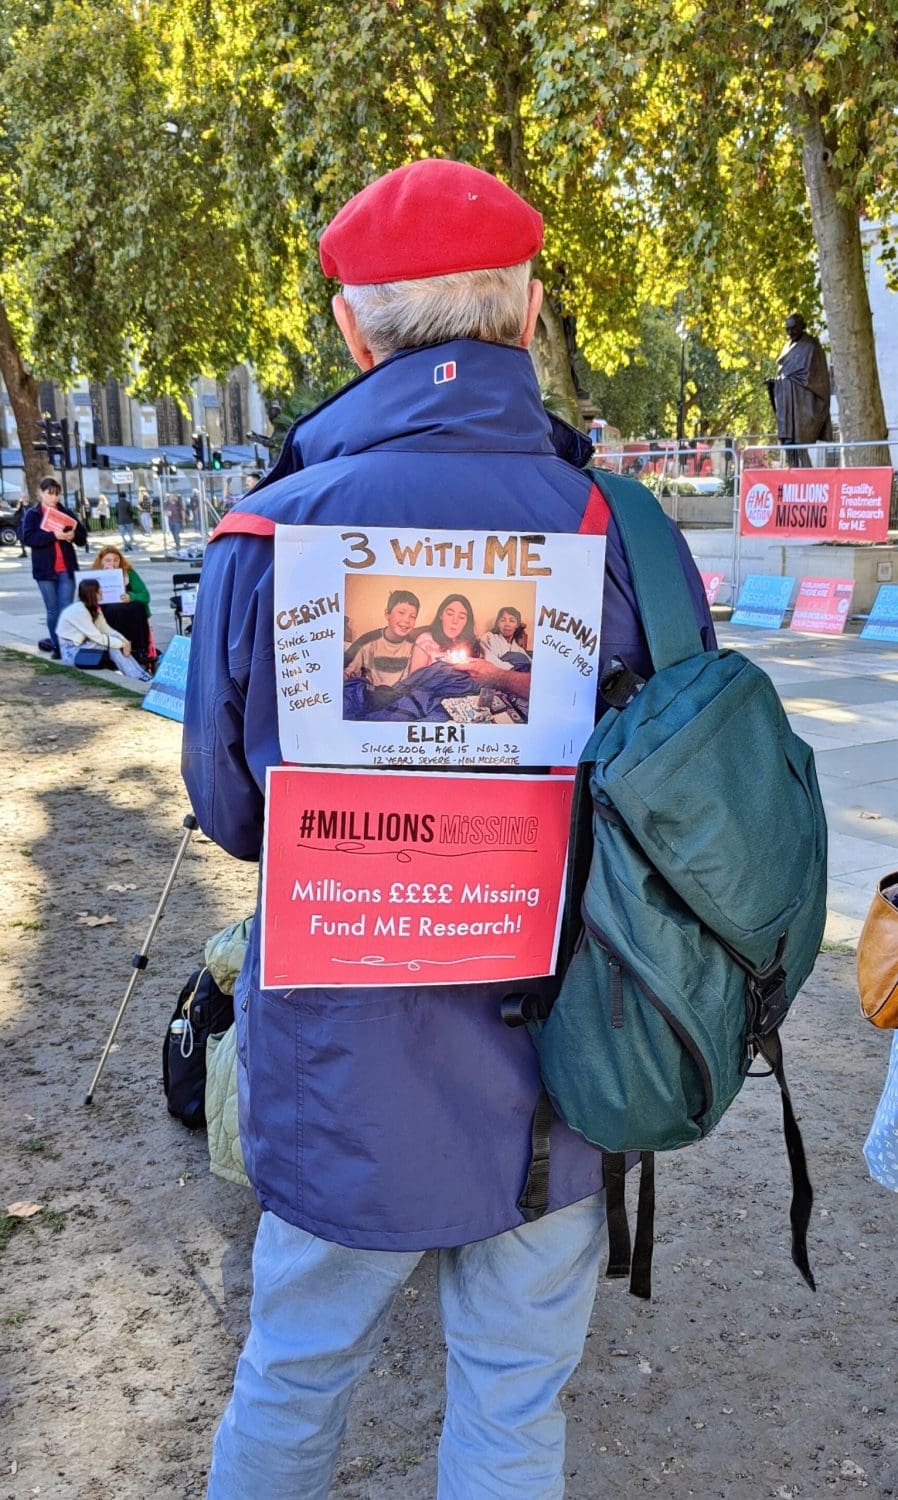 A person with a placard on his back at the Millions Missing protest